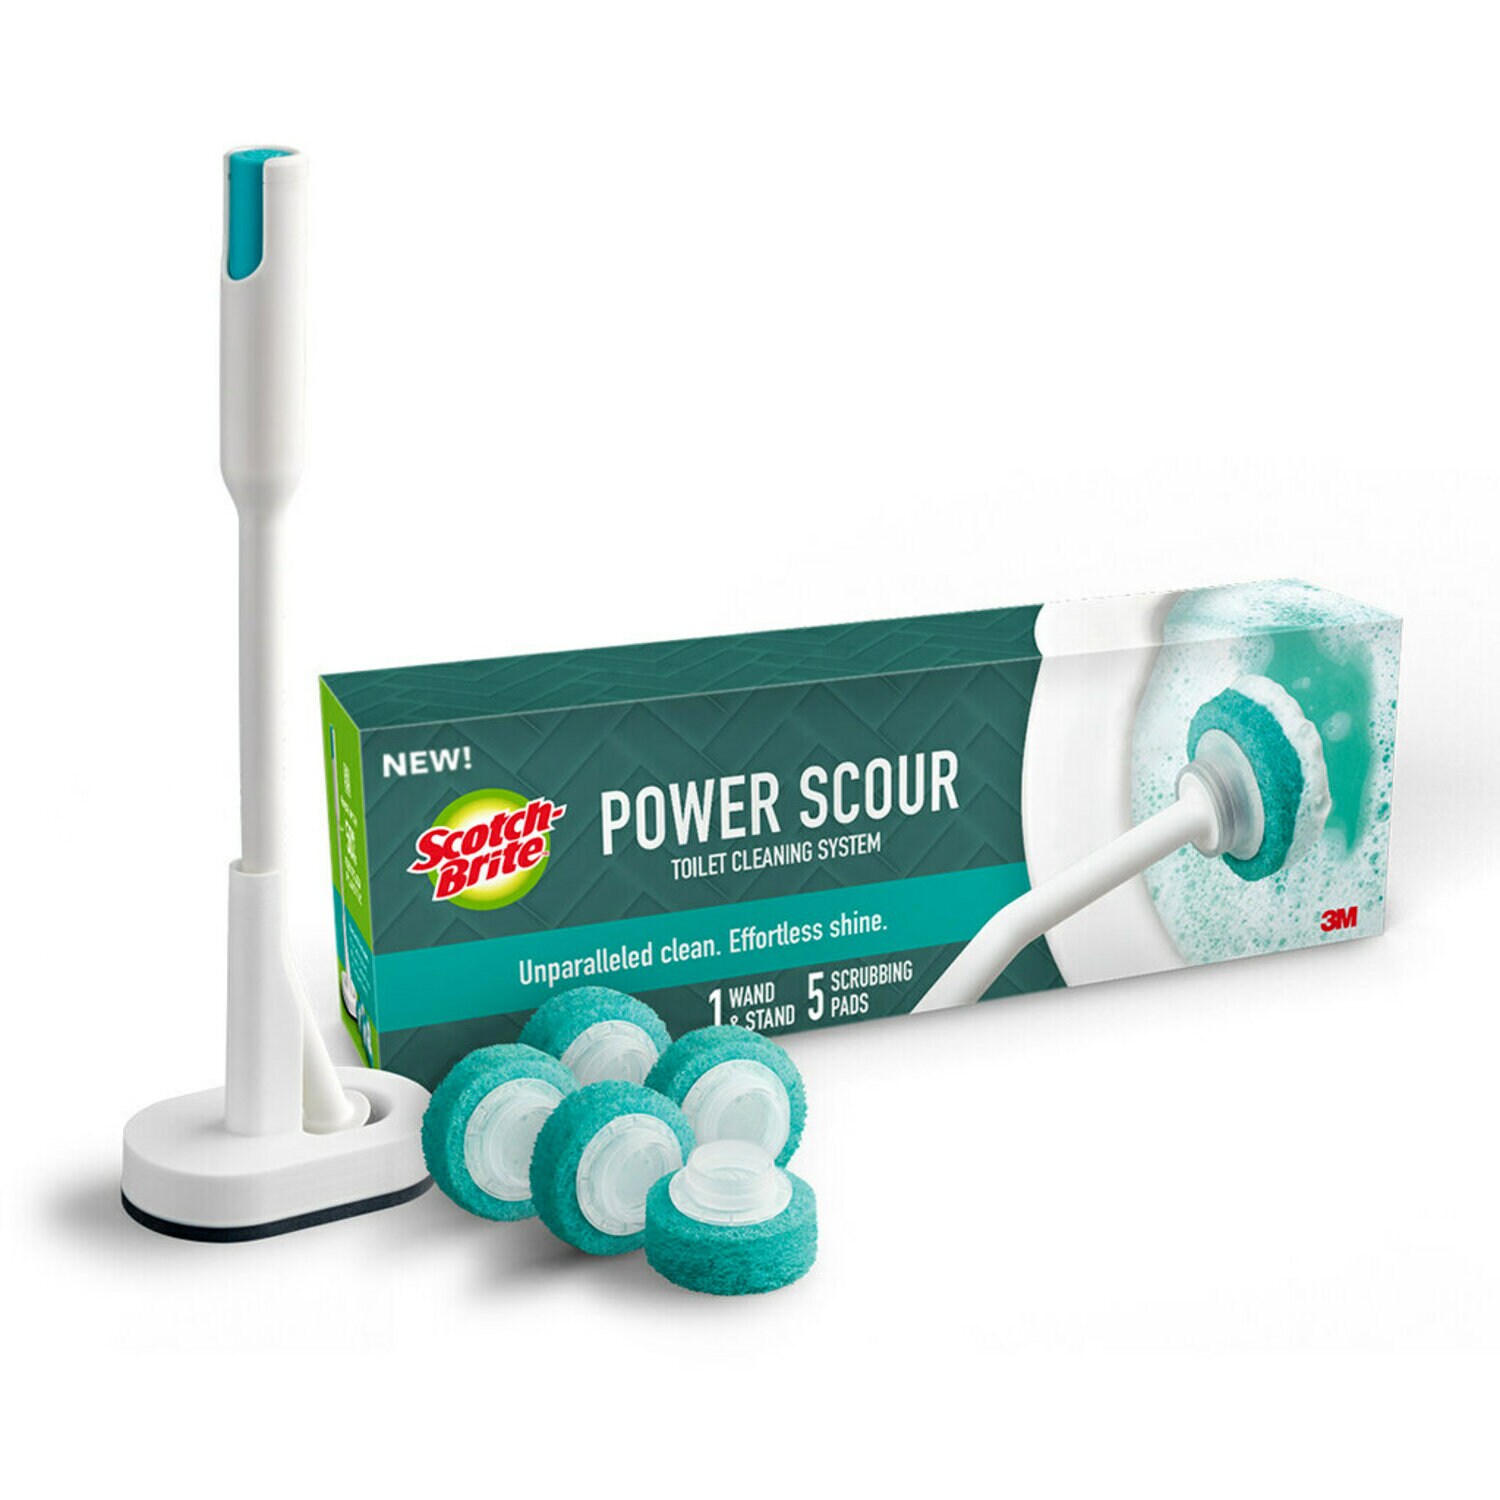 7100292293 - Scotch-Brite Power Scour Toilet Cleaning System 559-PS-SK-4, 4/1